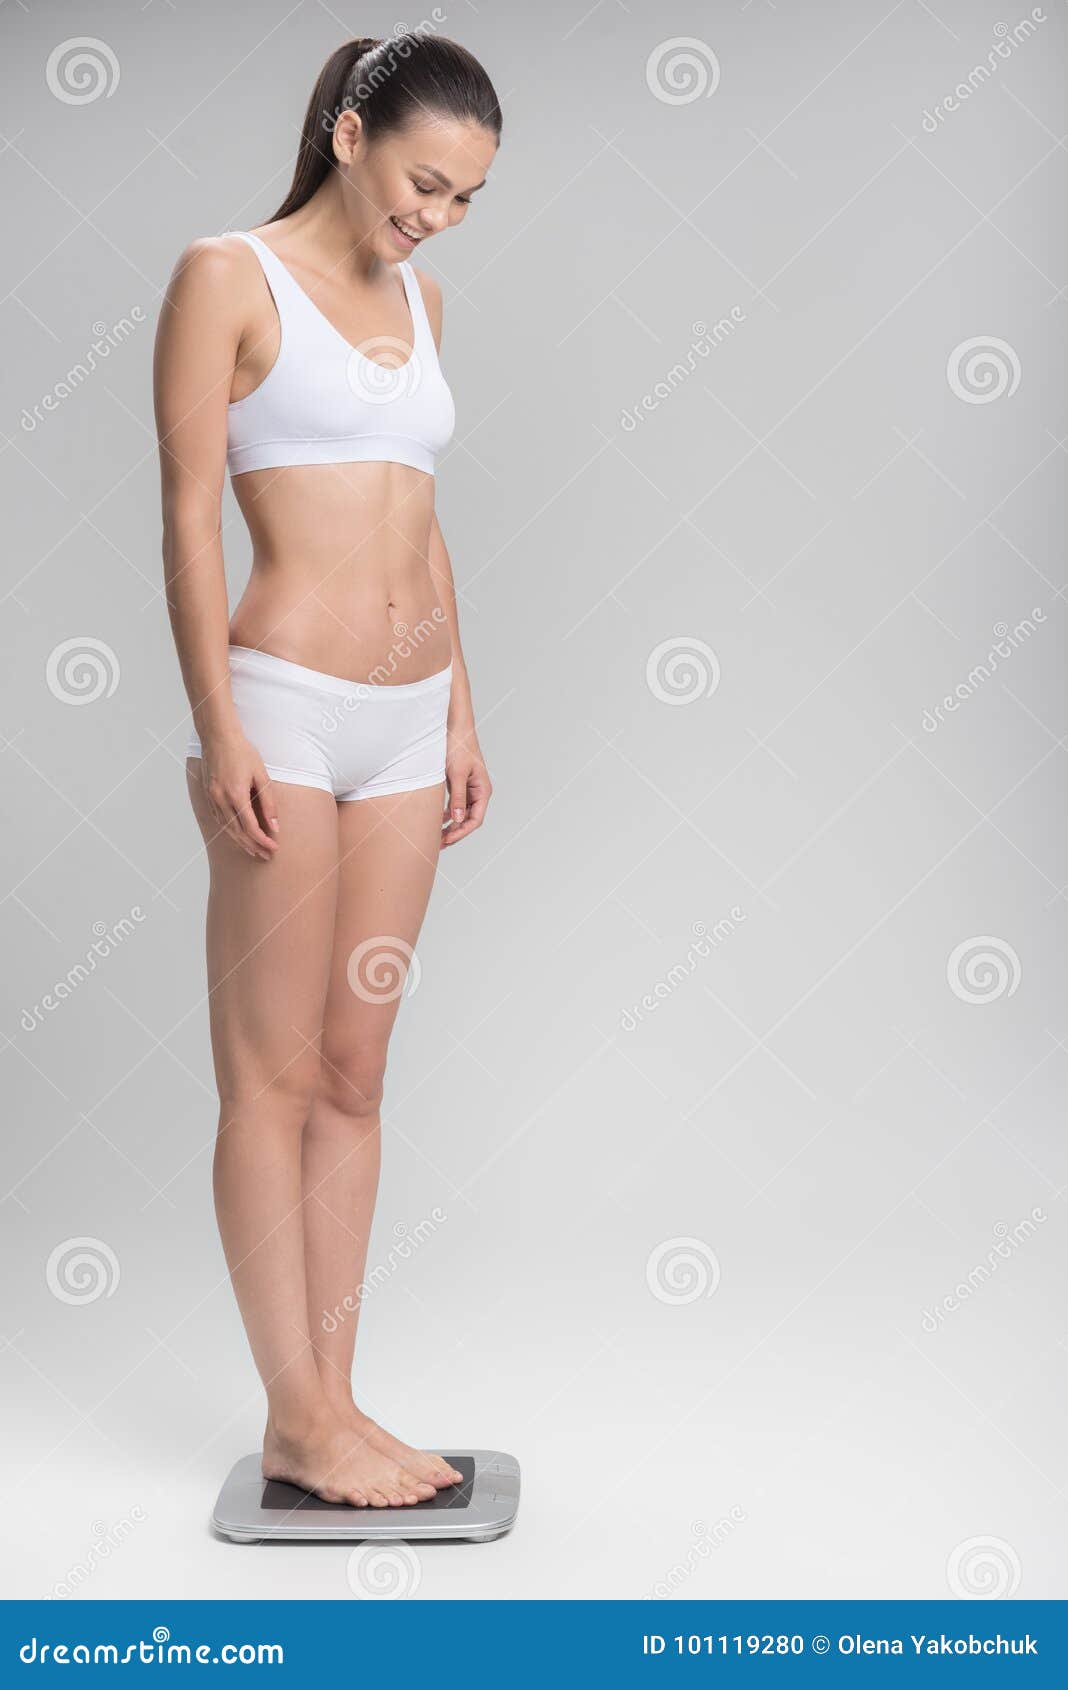 darrell wilkinson recommends skinny women pictures pic